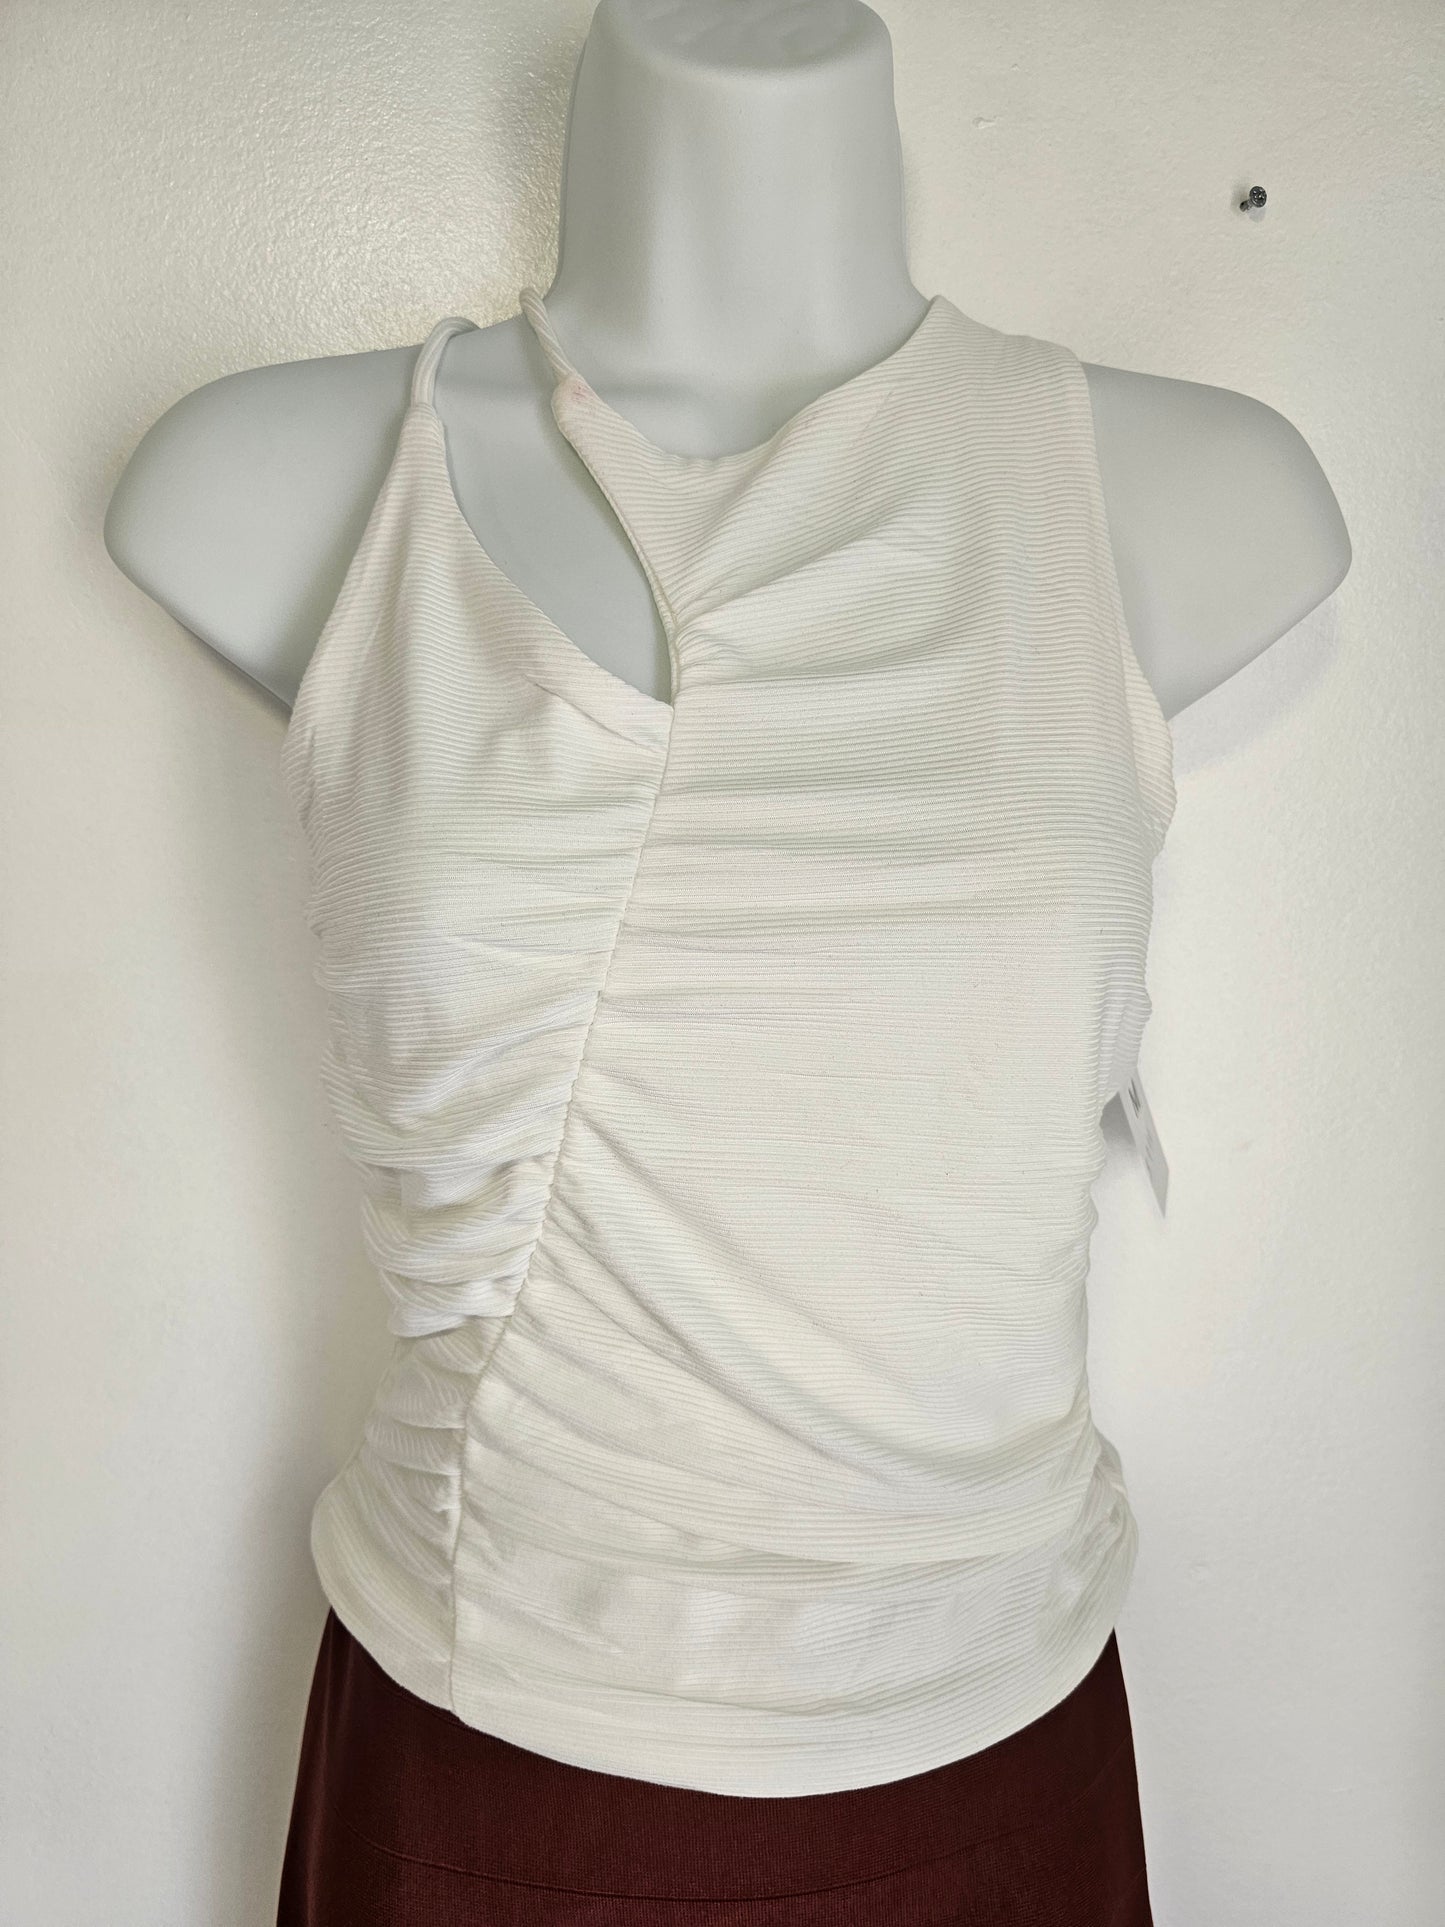 White Basic Top Cut-Out Rushed  Sleeveless